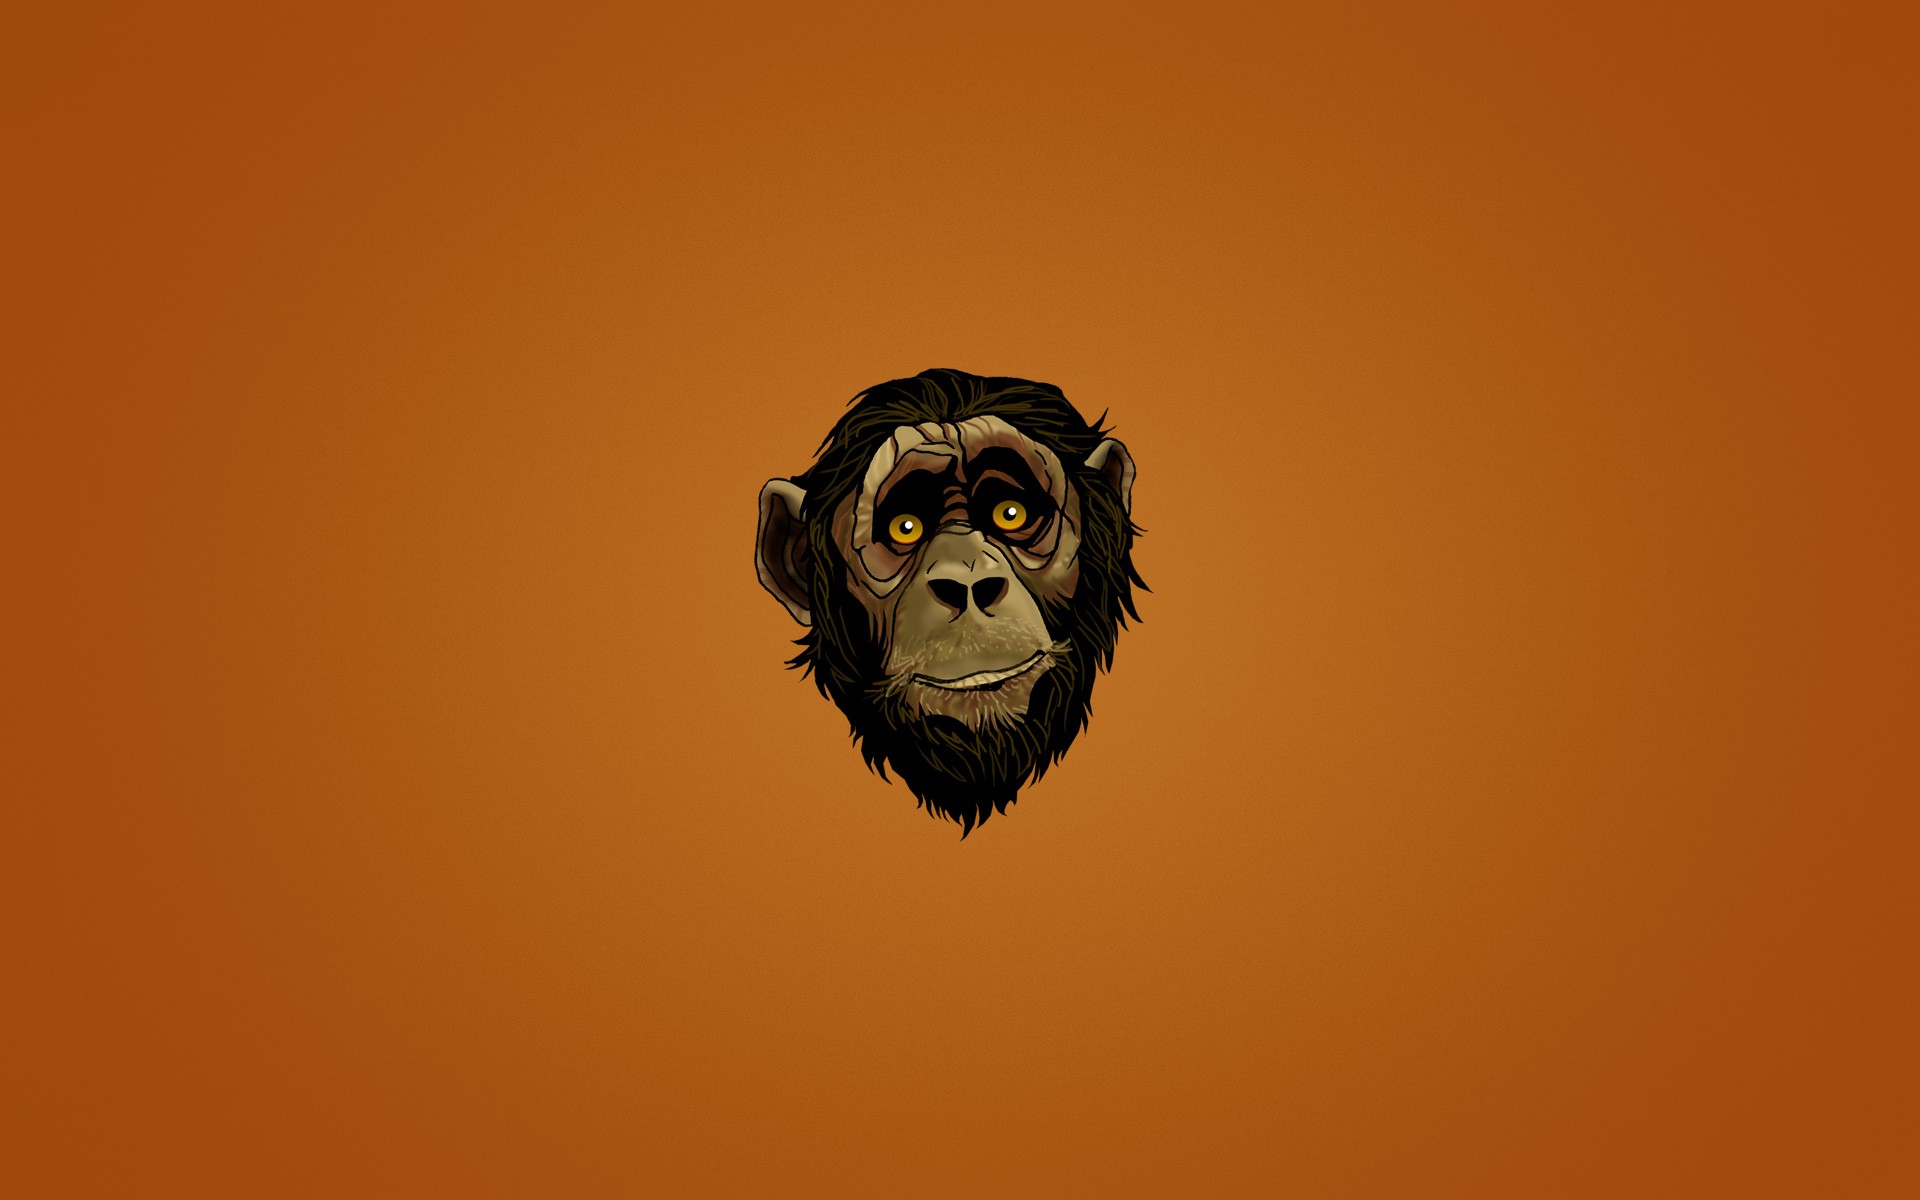 190+ Monkey HD Wallpapers and Backgrounds